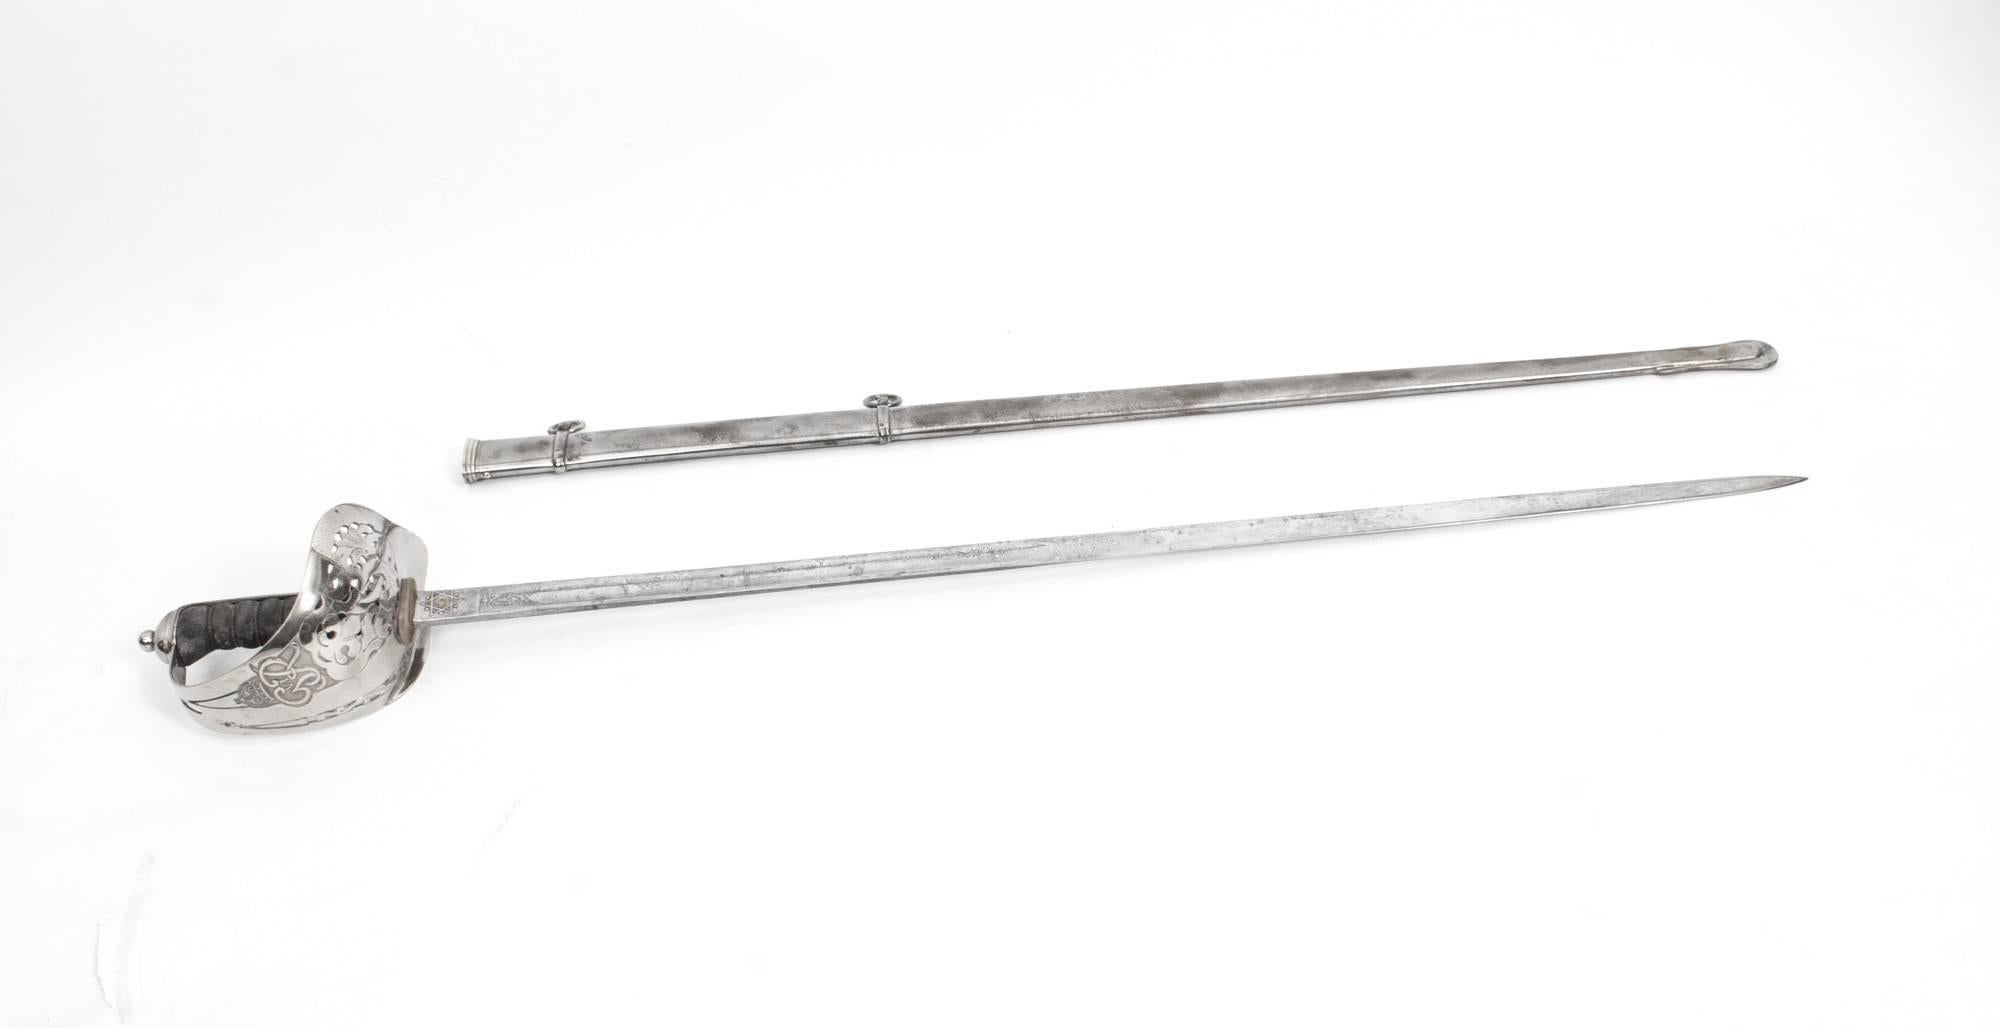 A superb George V officers sword with a mounted scabbard retailed by J.R. Gaunt and Son, Late Edward Thurkle, London and Birmingham circa 1897 in date.

The sword features a silver plated pieced foliage basket and shagreen hilt with a single